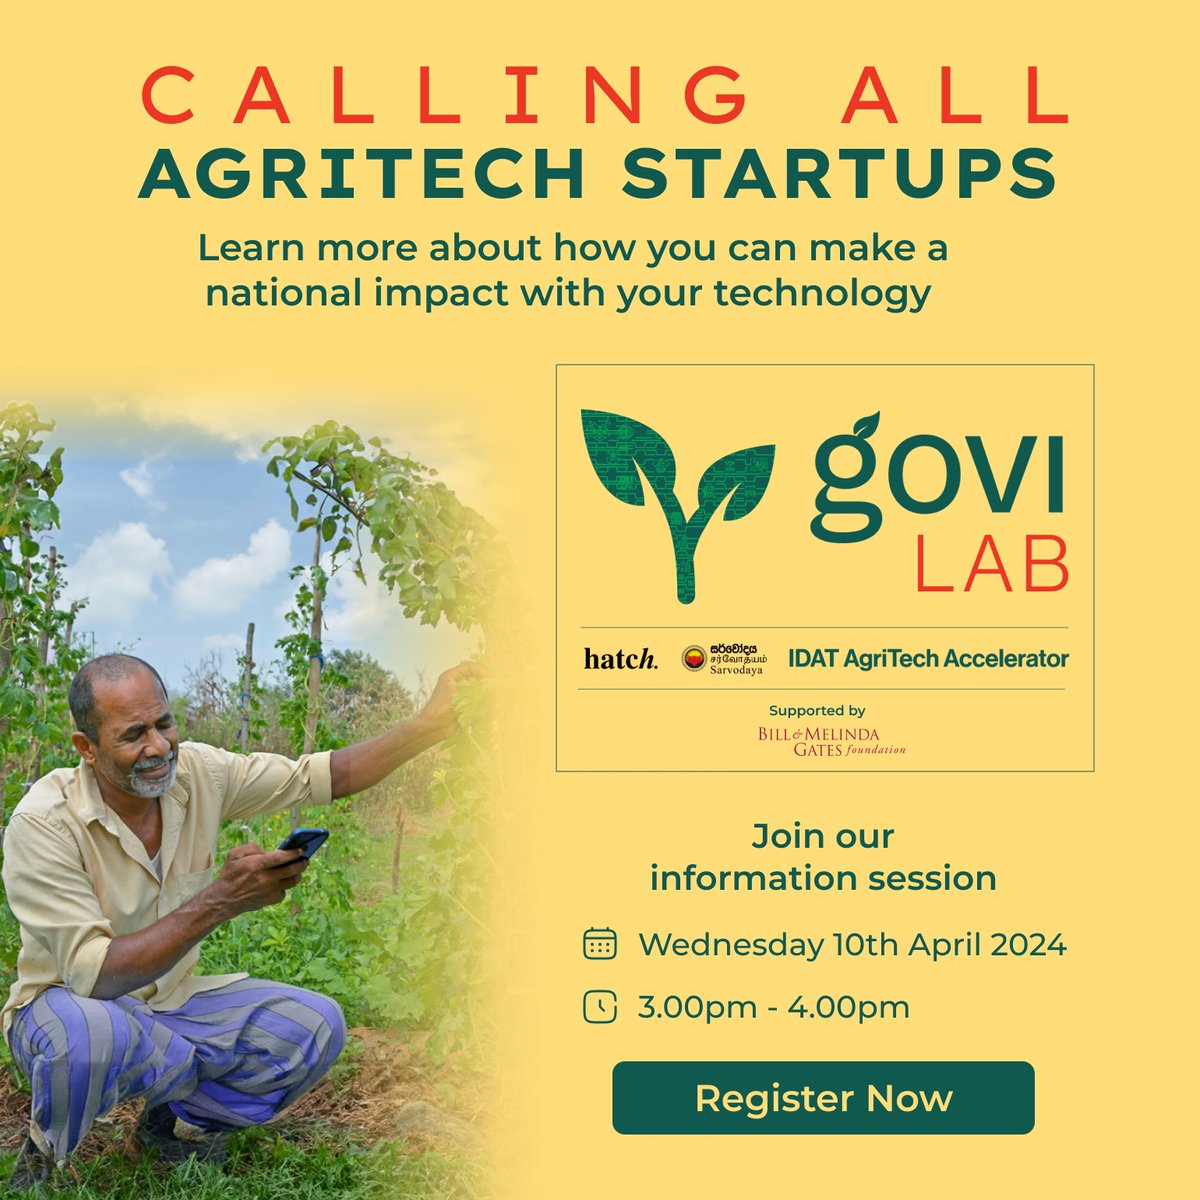 Join us today to learn how the 𝐆𝐨𝐯𝐢𝐋𝐚𝐛 𝐀𝐠𝐫𝐢𝐓𝐞𝐜𝐡 𝐀𝐜𝐜𝐞𝐥𝐞𝐫𝐚𝐭𝐨𝐫 can help you scale your startup to make a real difference for smallholder farmers across Sri Lanka. @hatchonline Register in advance : bit.ly/3UaHI1c